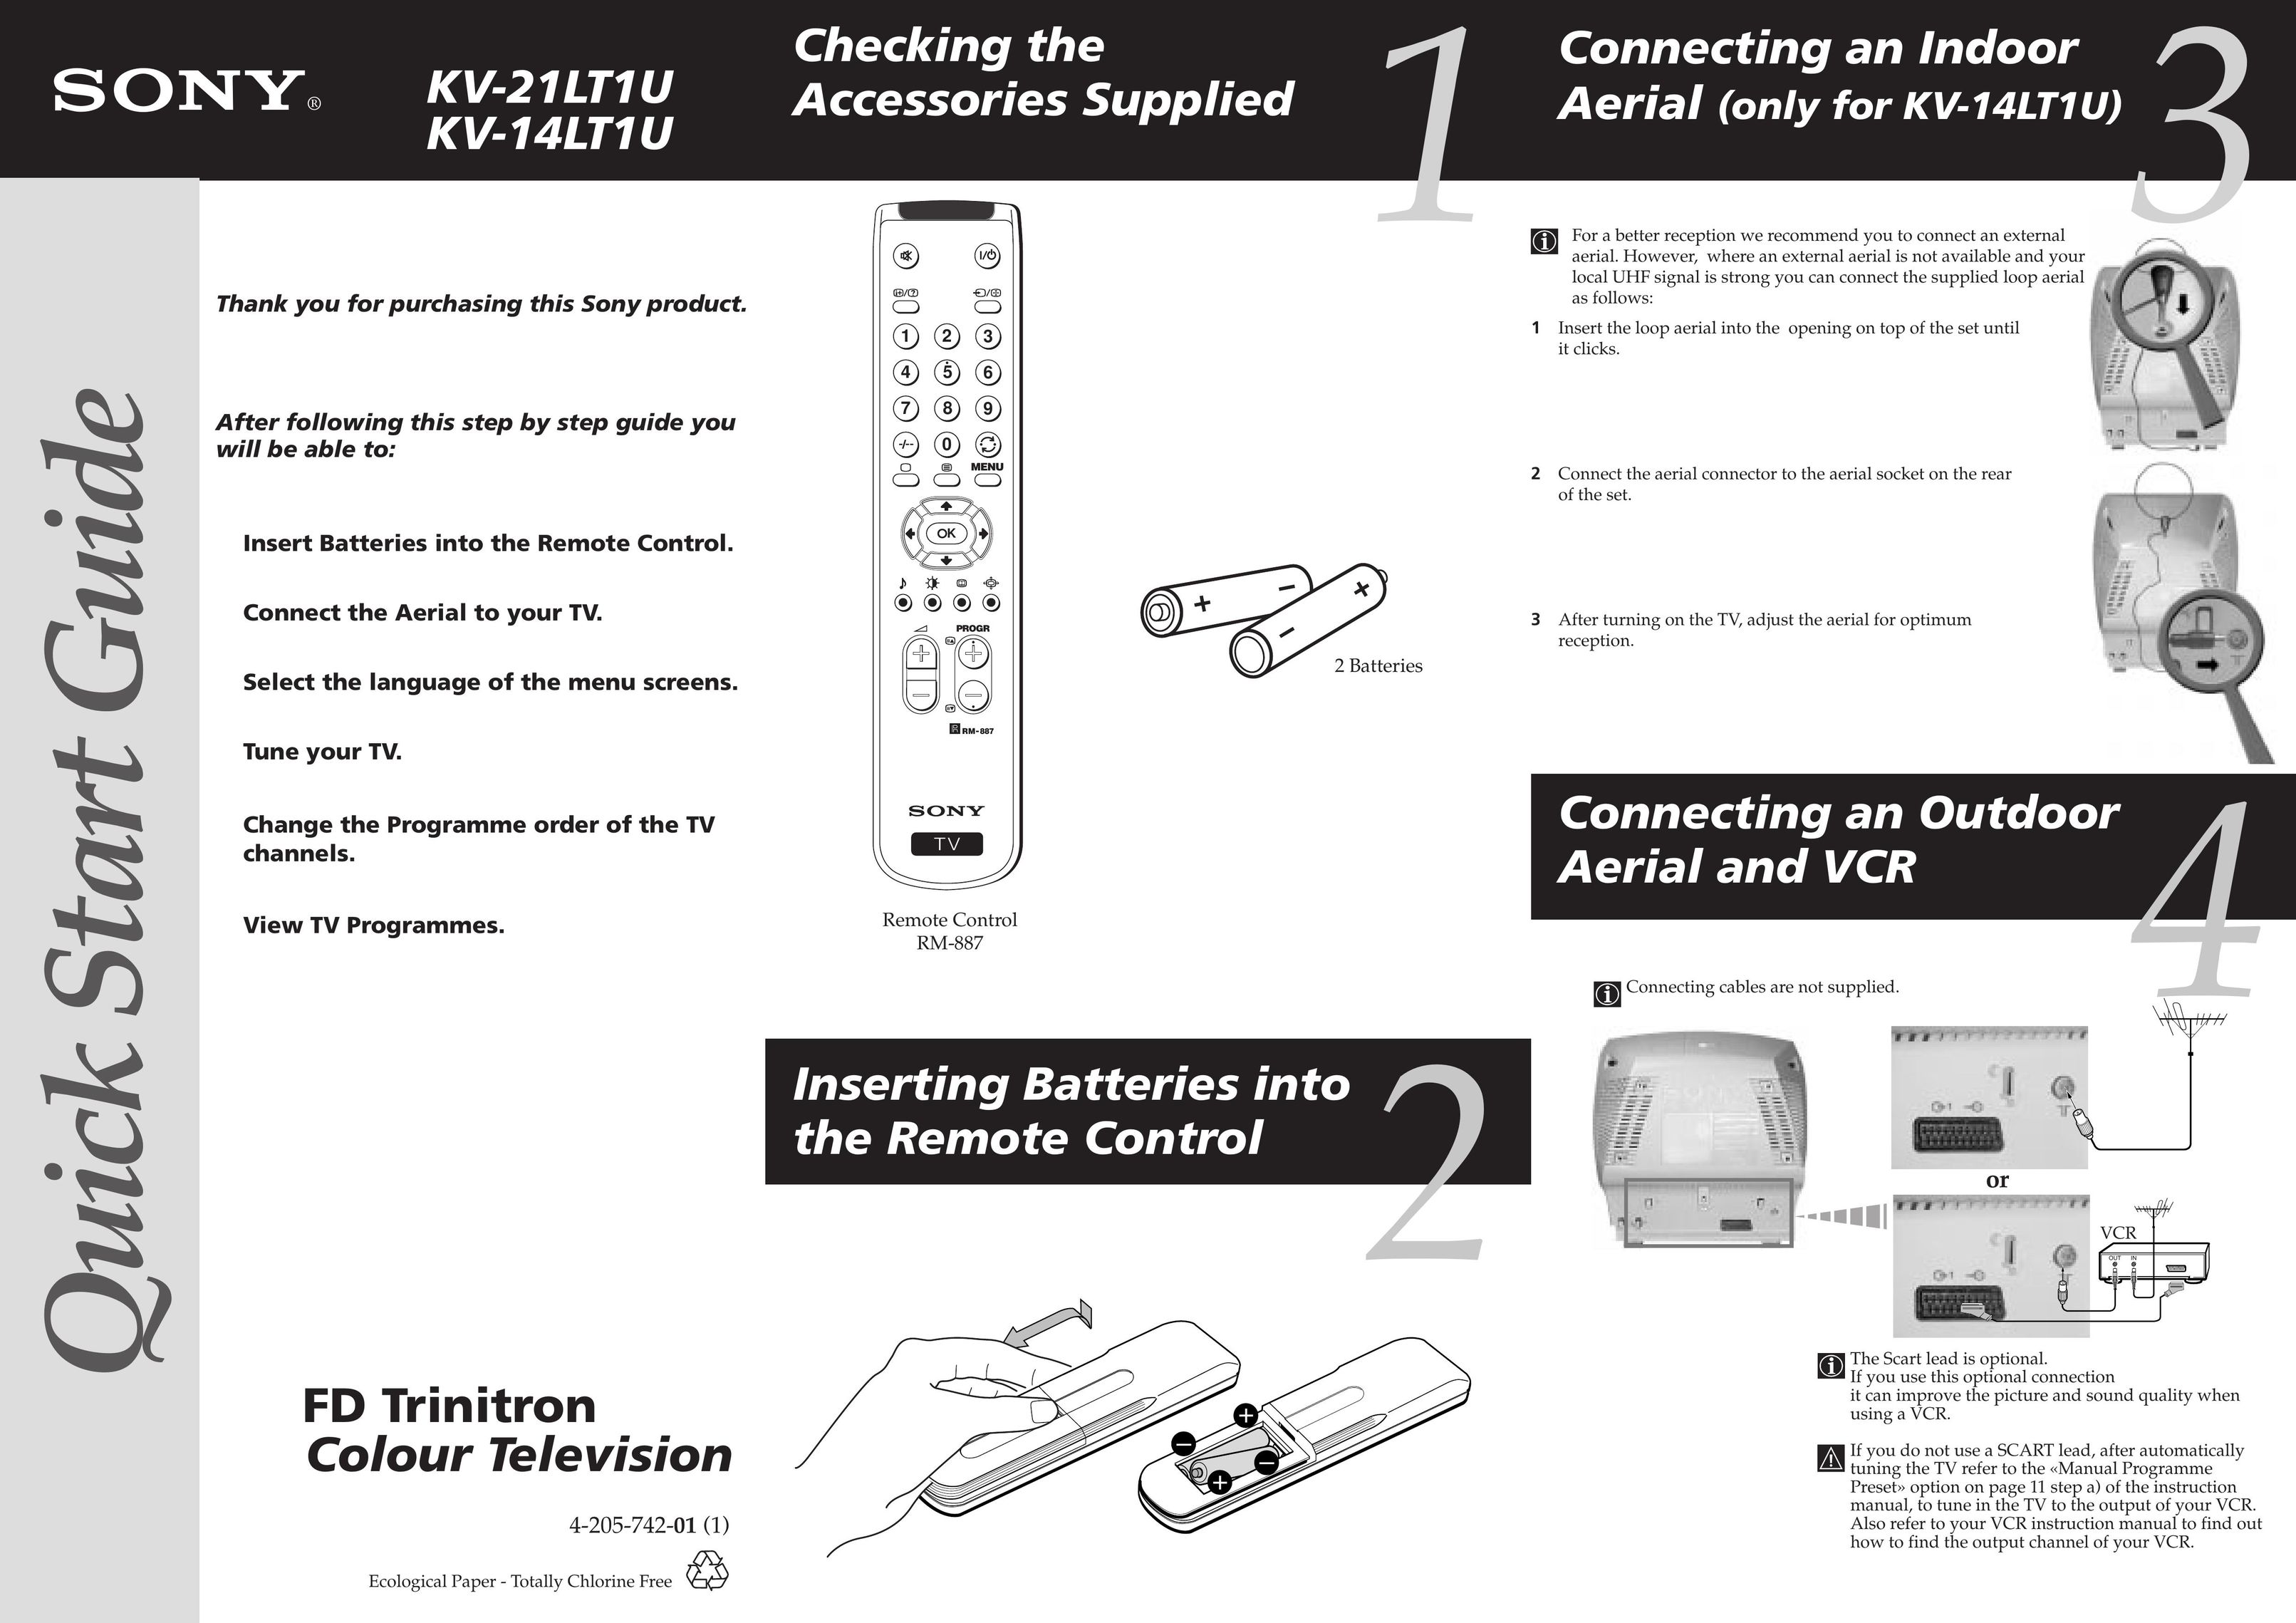 Sony RM-887 Universal Remote User Manual